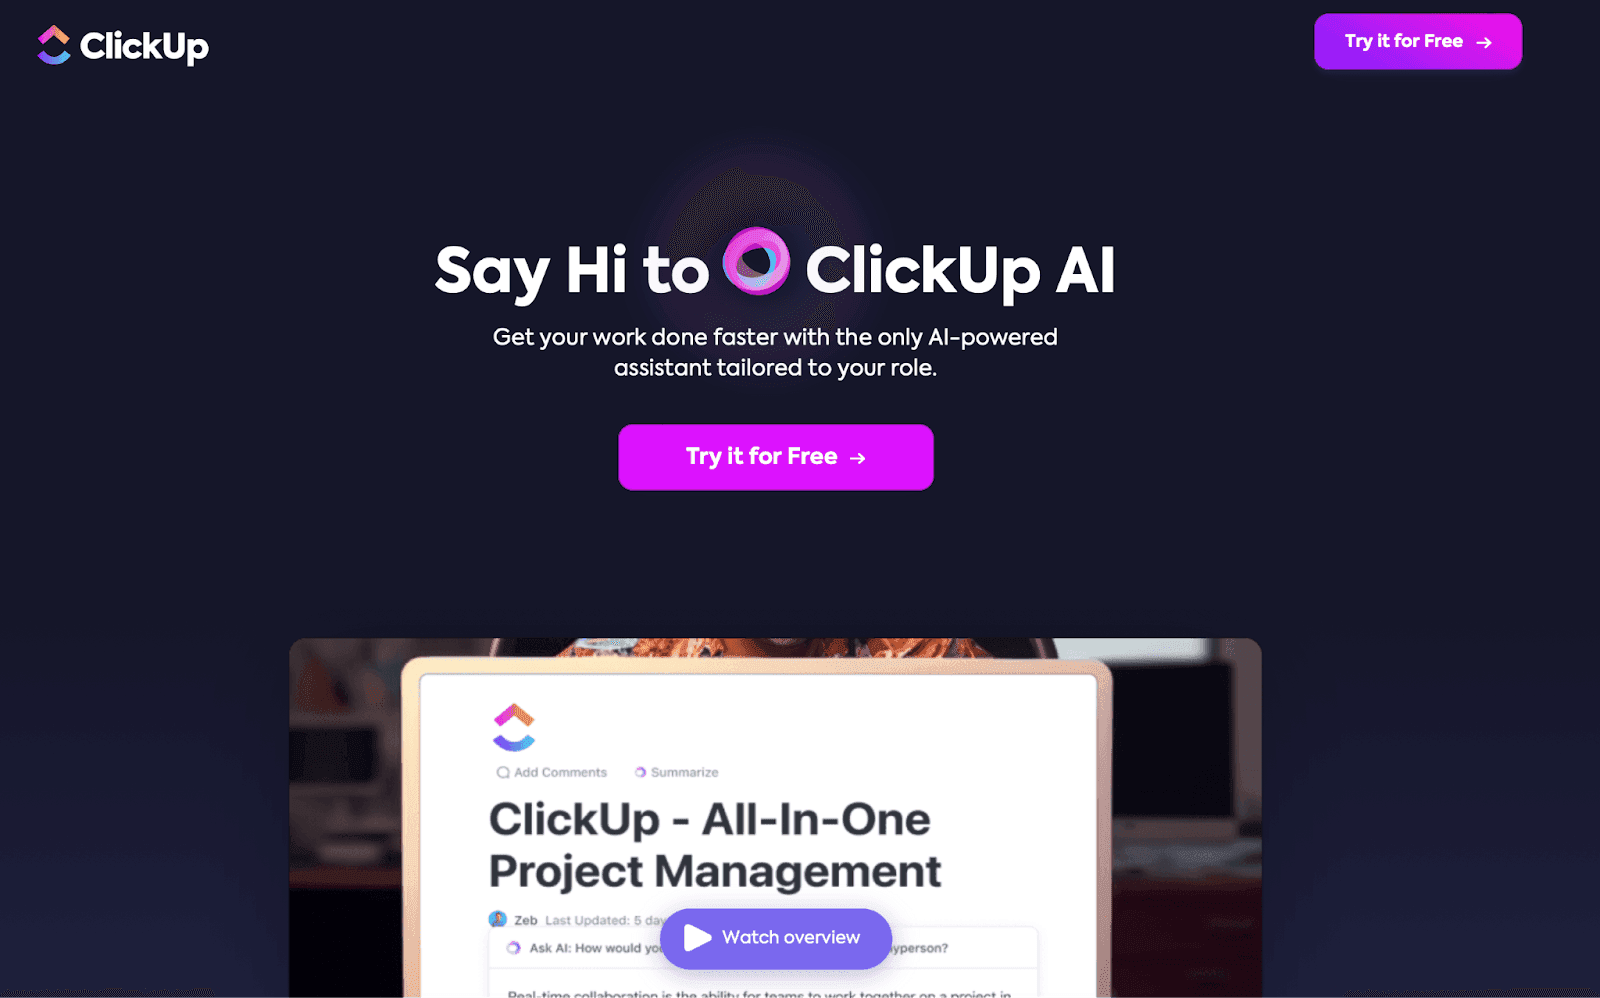 Say Hi to Clickup AI - Try it for Free